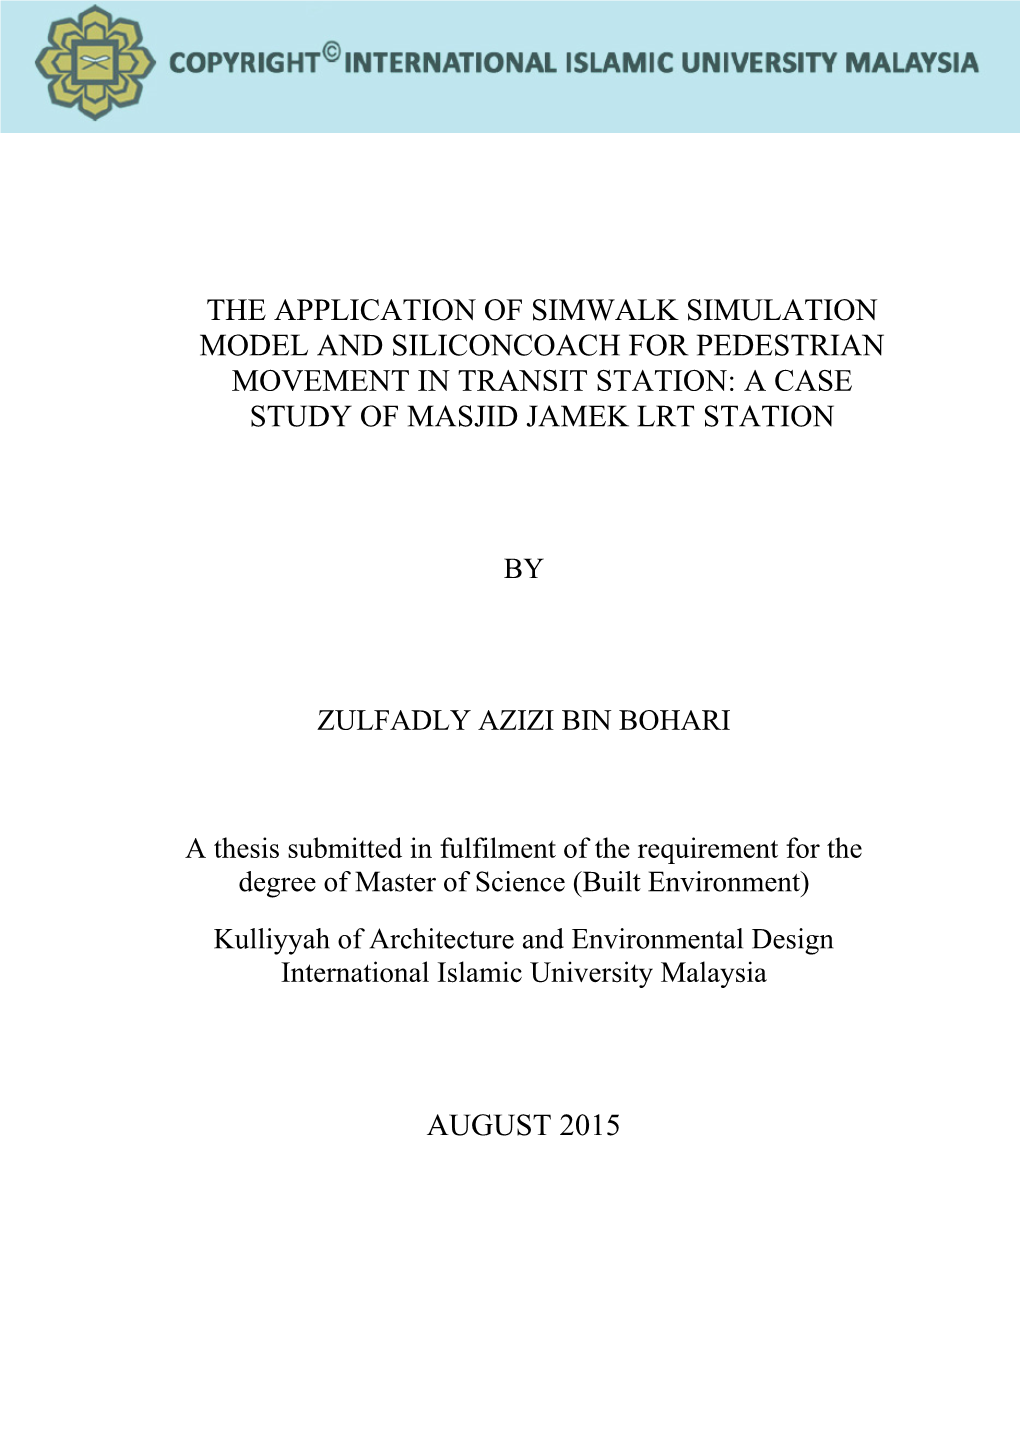 The Application of Simwalk Simulation Model and Siliconcoach for Pedestrian Movement in Transit Station: a Case Study of Masjid Jamek Lrt Station